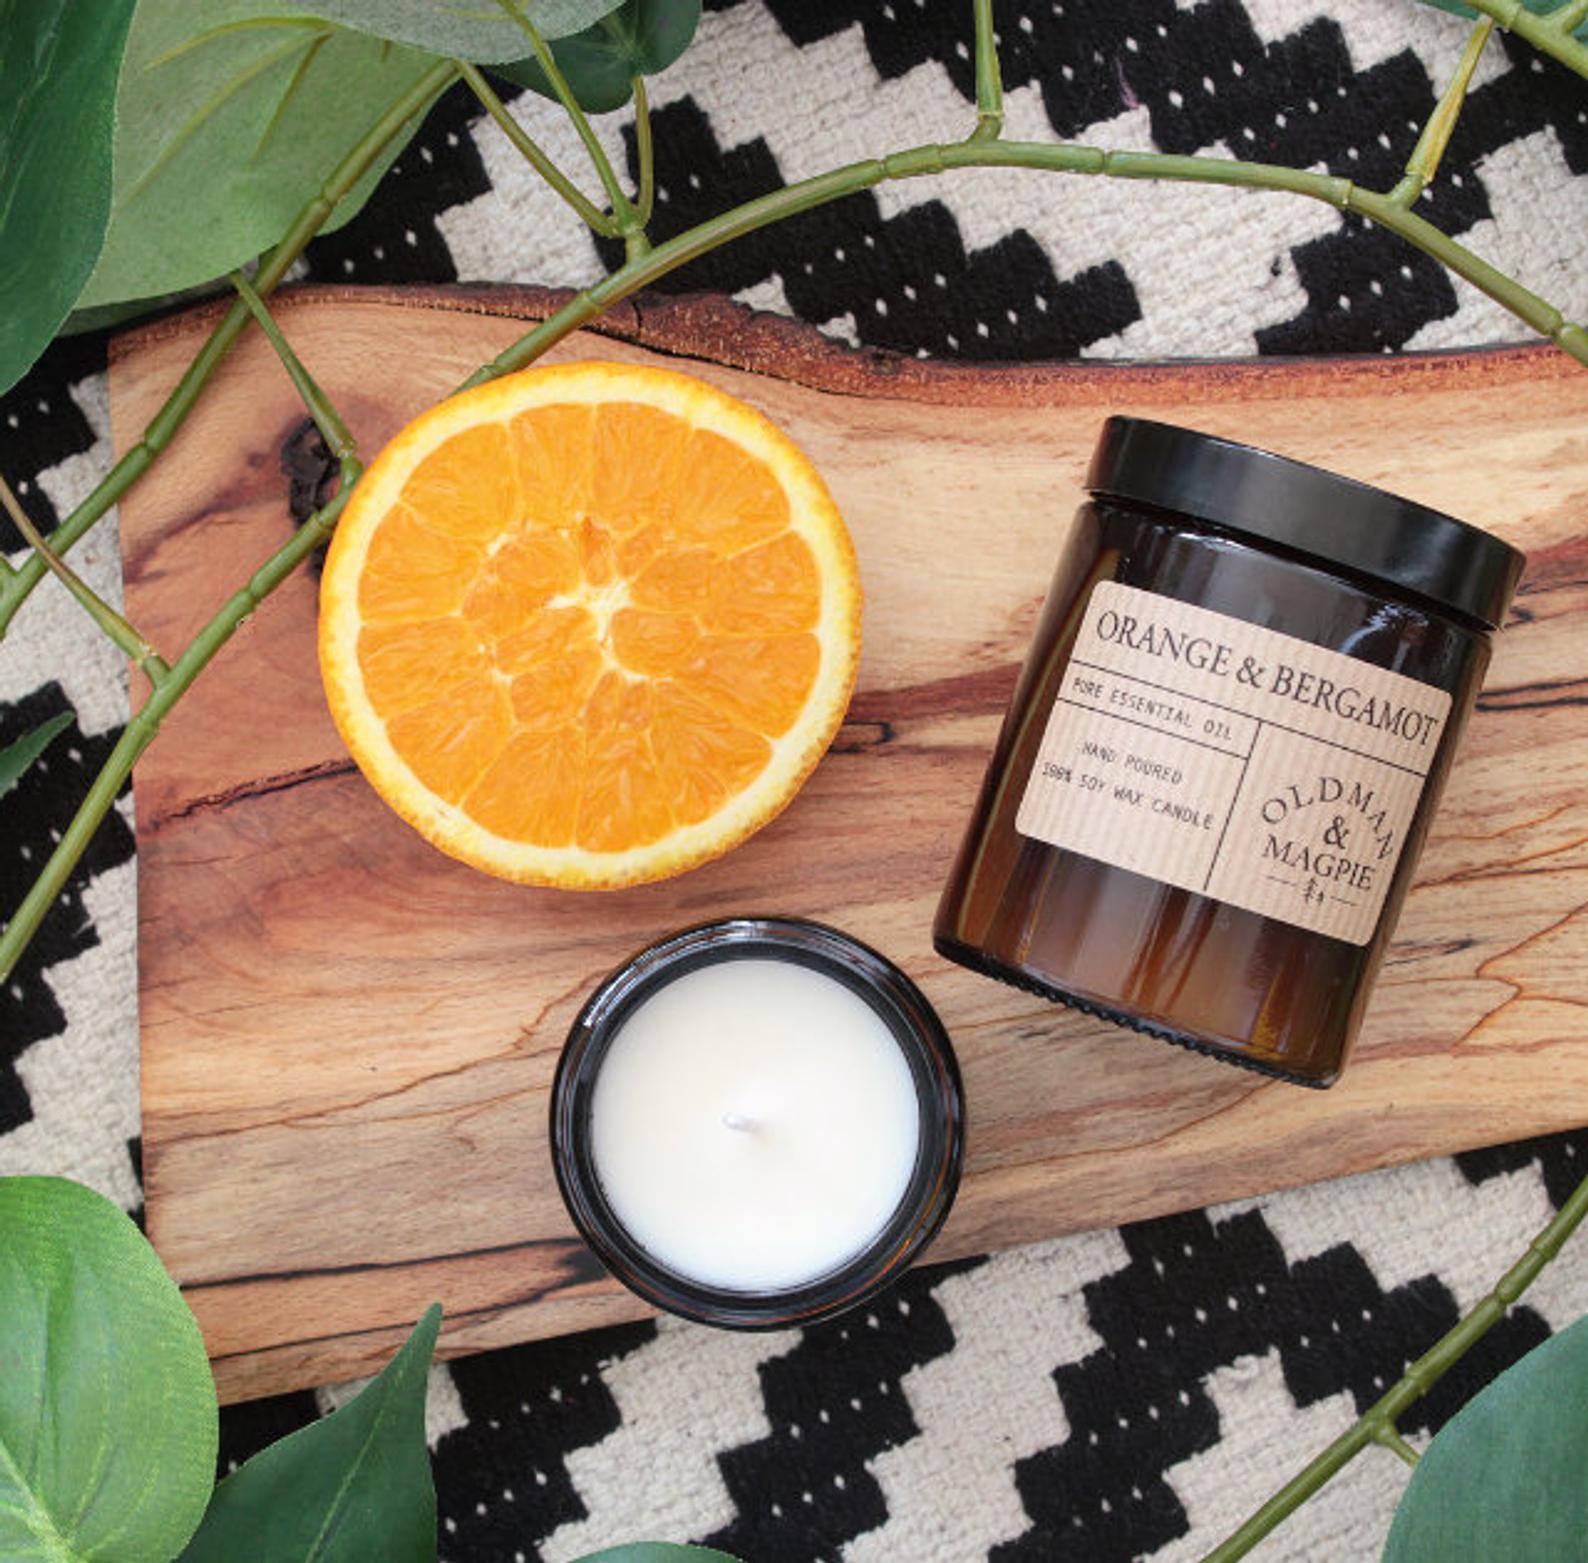 Old Man & Magpie Orange and Bergamot Pure Natural Essential Oil Soy Wax Candle